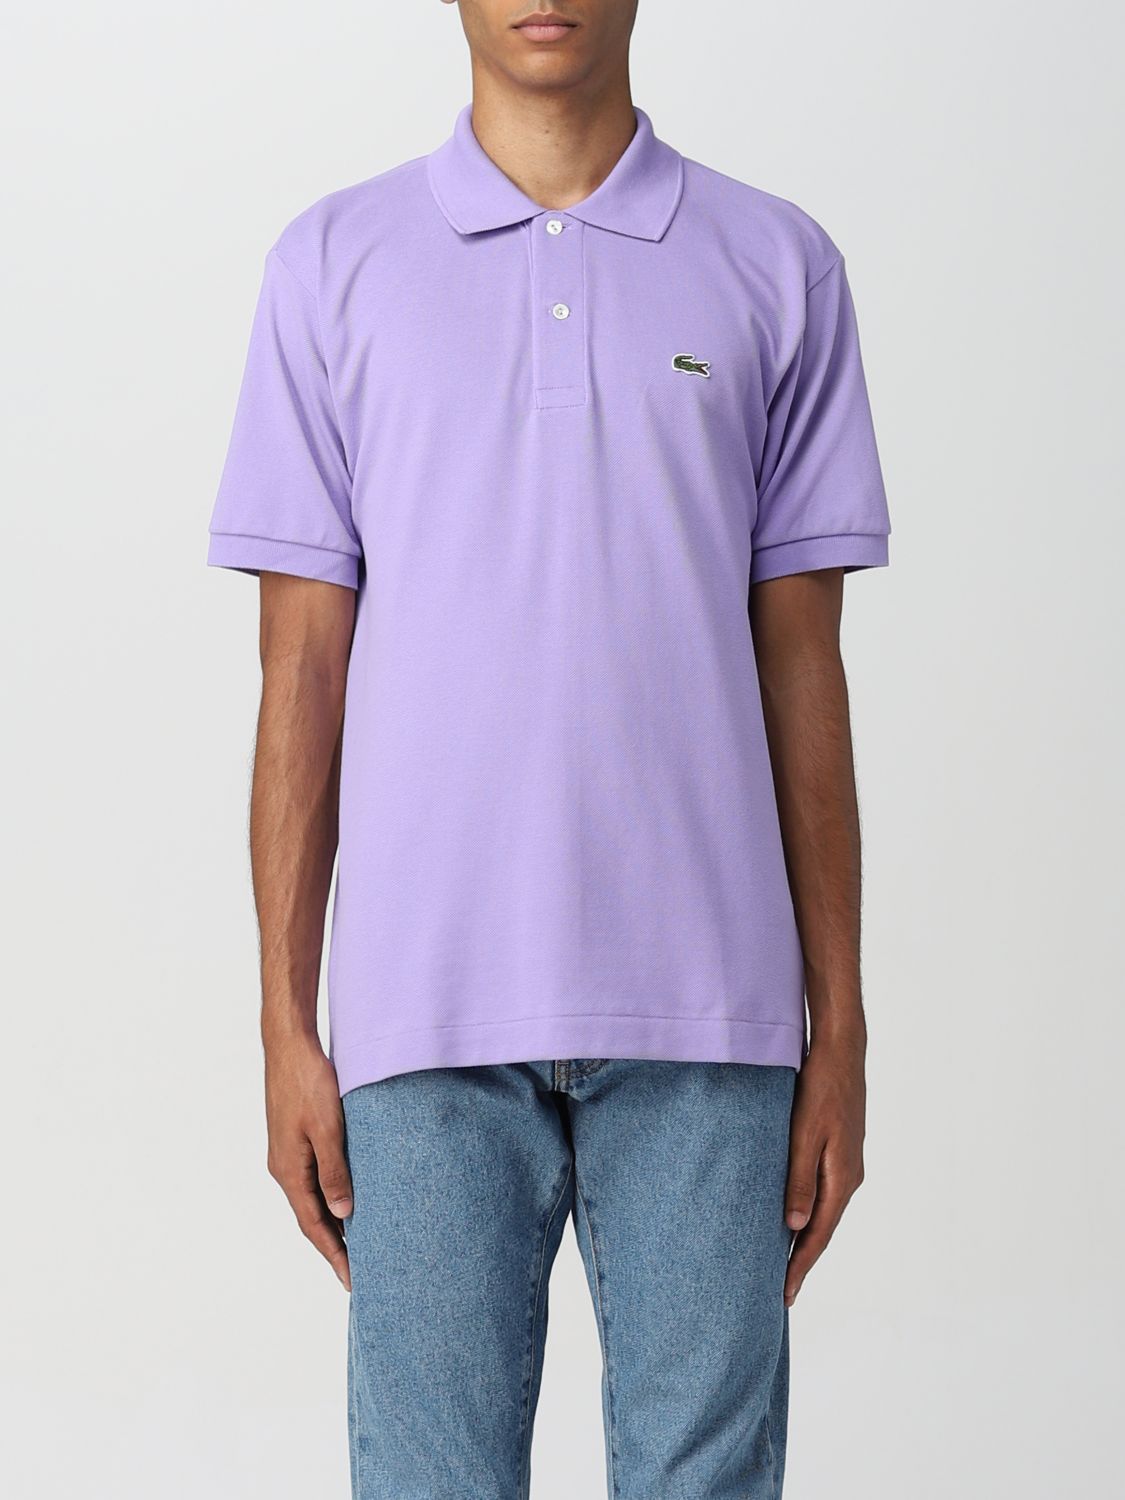 LACOSTE: shirt for man Lilac | Lacoste shirt 1212 online on